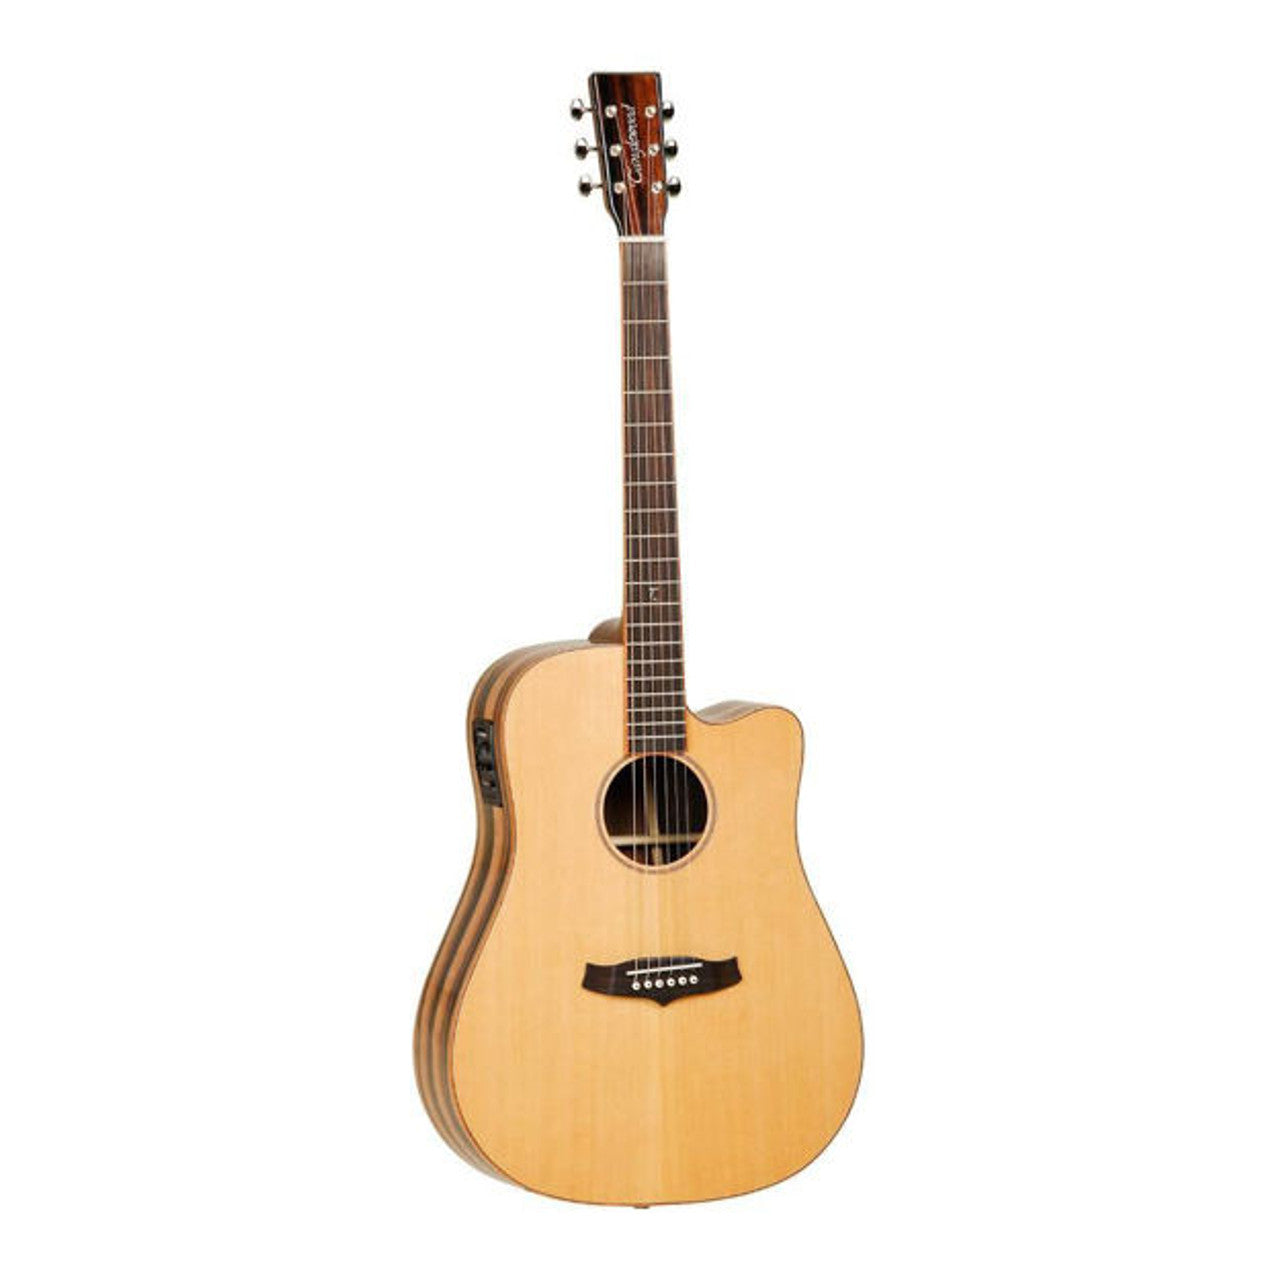 Tanglewood TJ5 CE Java Series Dreadnought Cutaway Acoustic-Electric Guitar with Solid Cedar Top